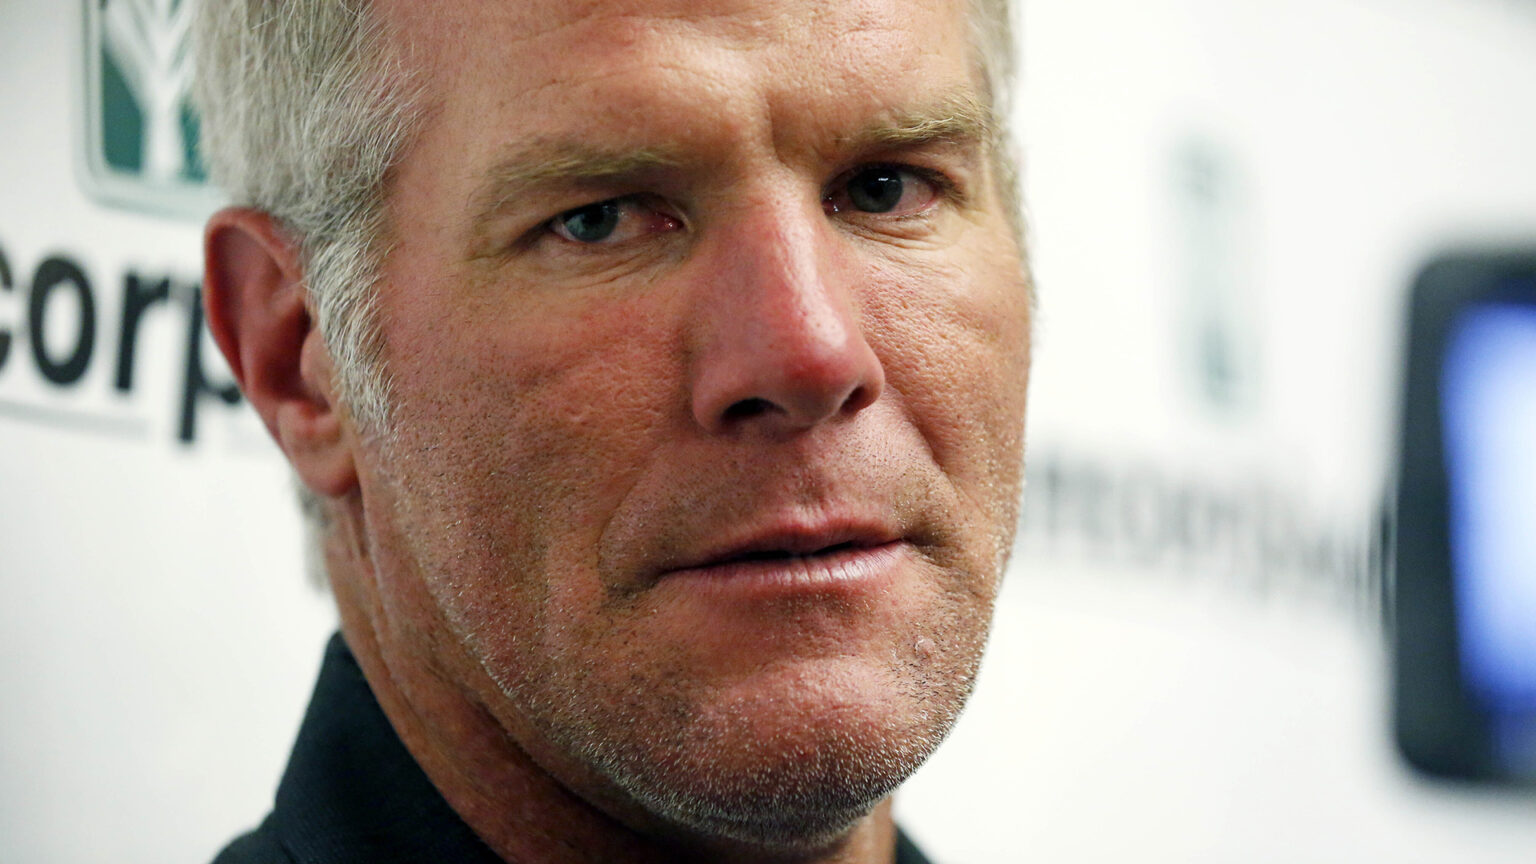 A close-up photos shows the face of Brett Favre with a logo backdrop in the background.